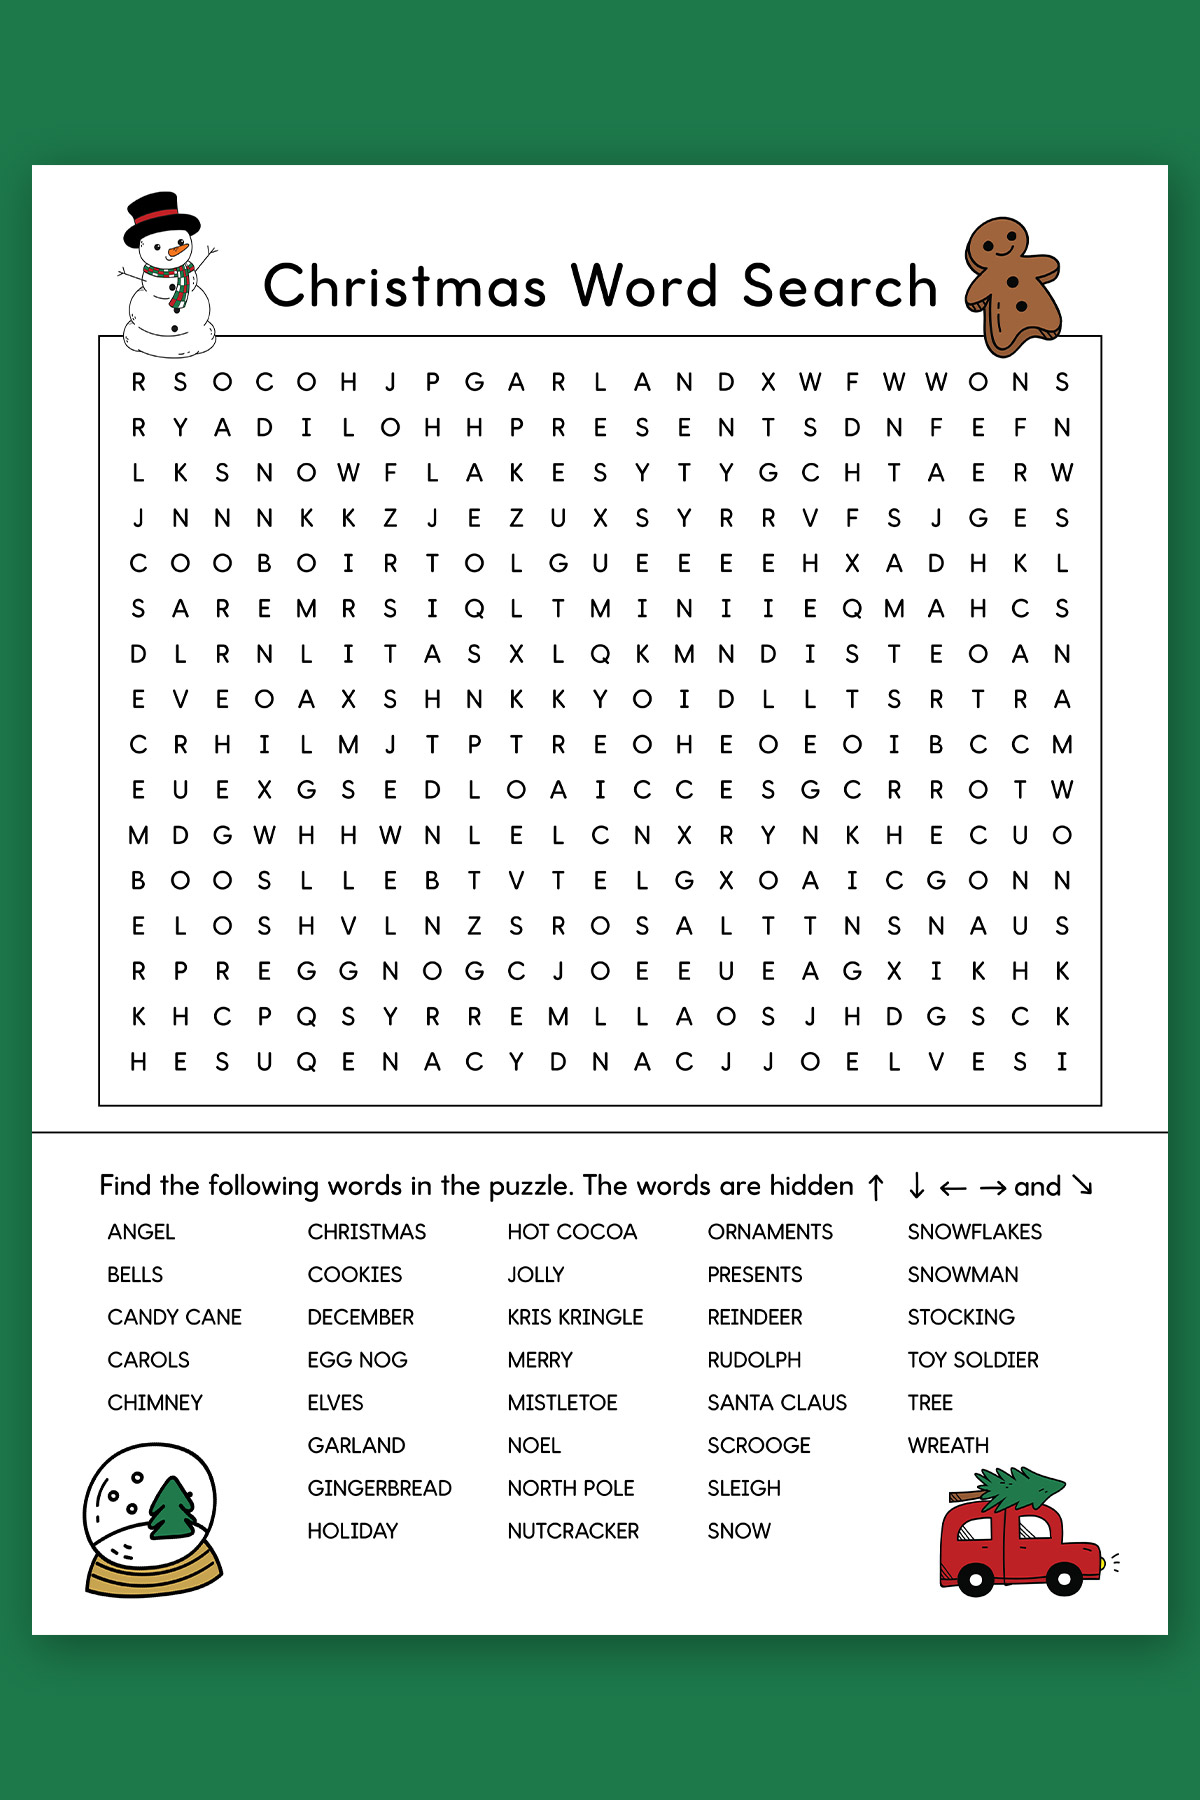 This is an example of one free words searches you can get from the Christmas word find printable set.